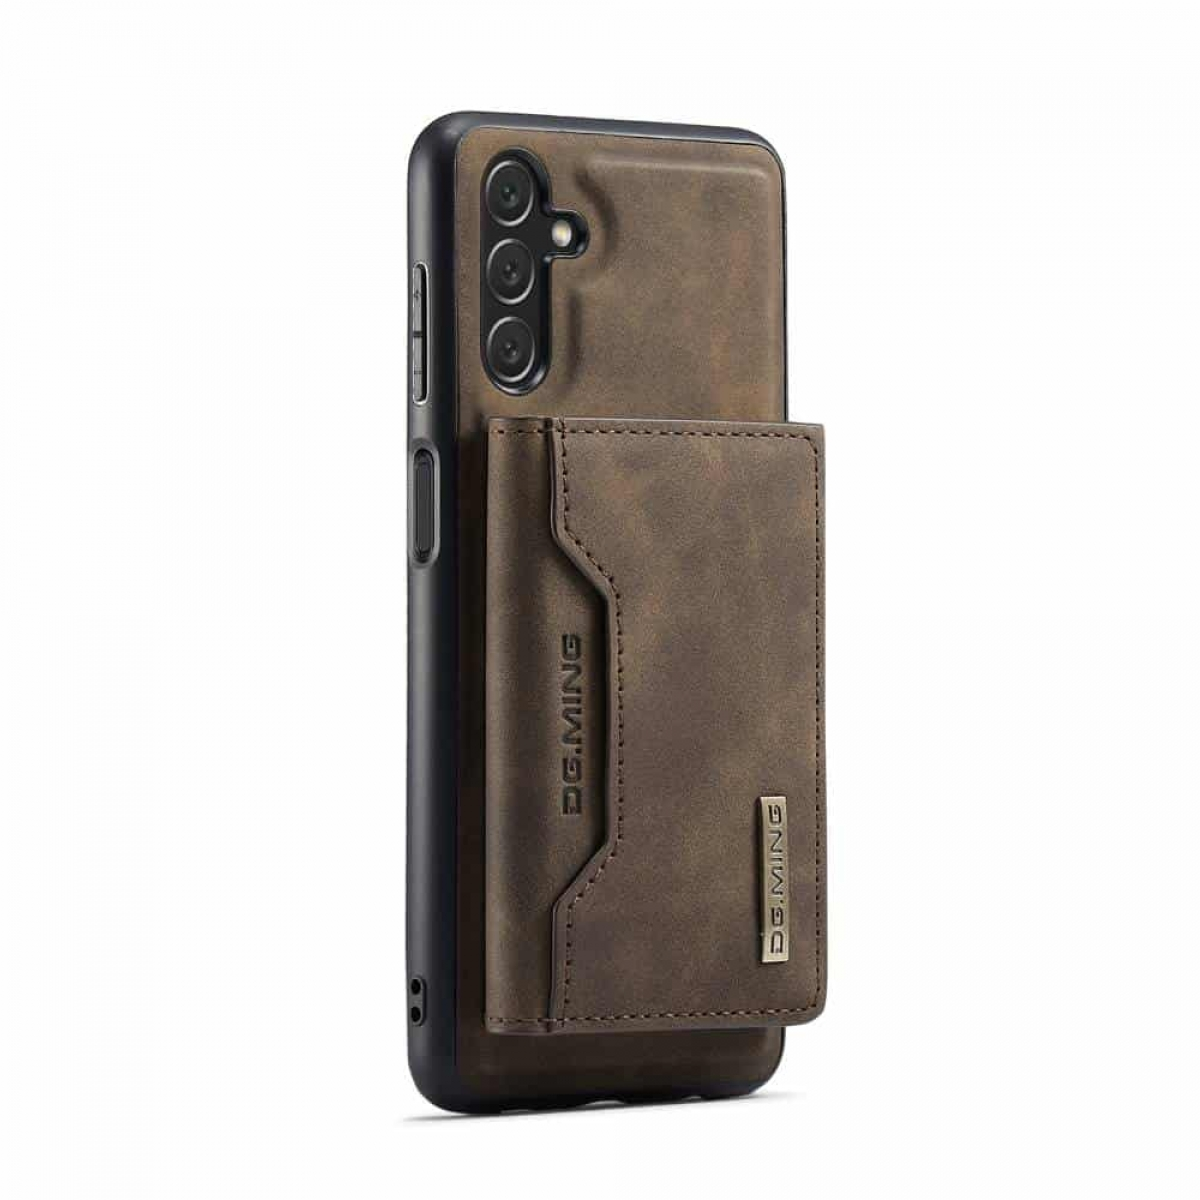 DG MING 2in1, Bookcover, A54 5G, Coffee Samsung, Galaxy